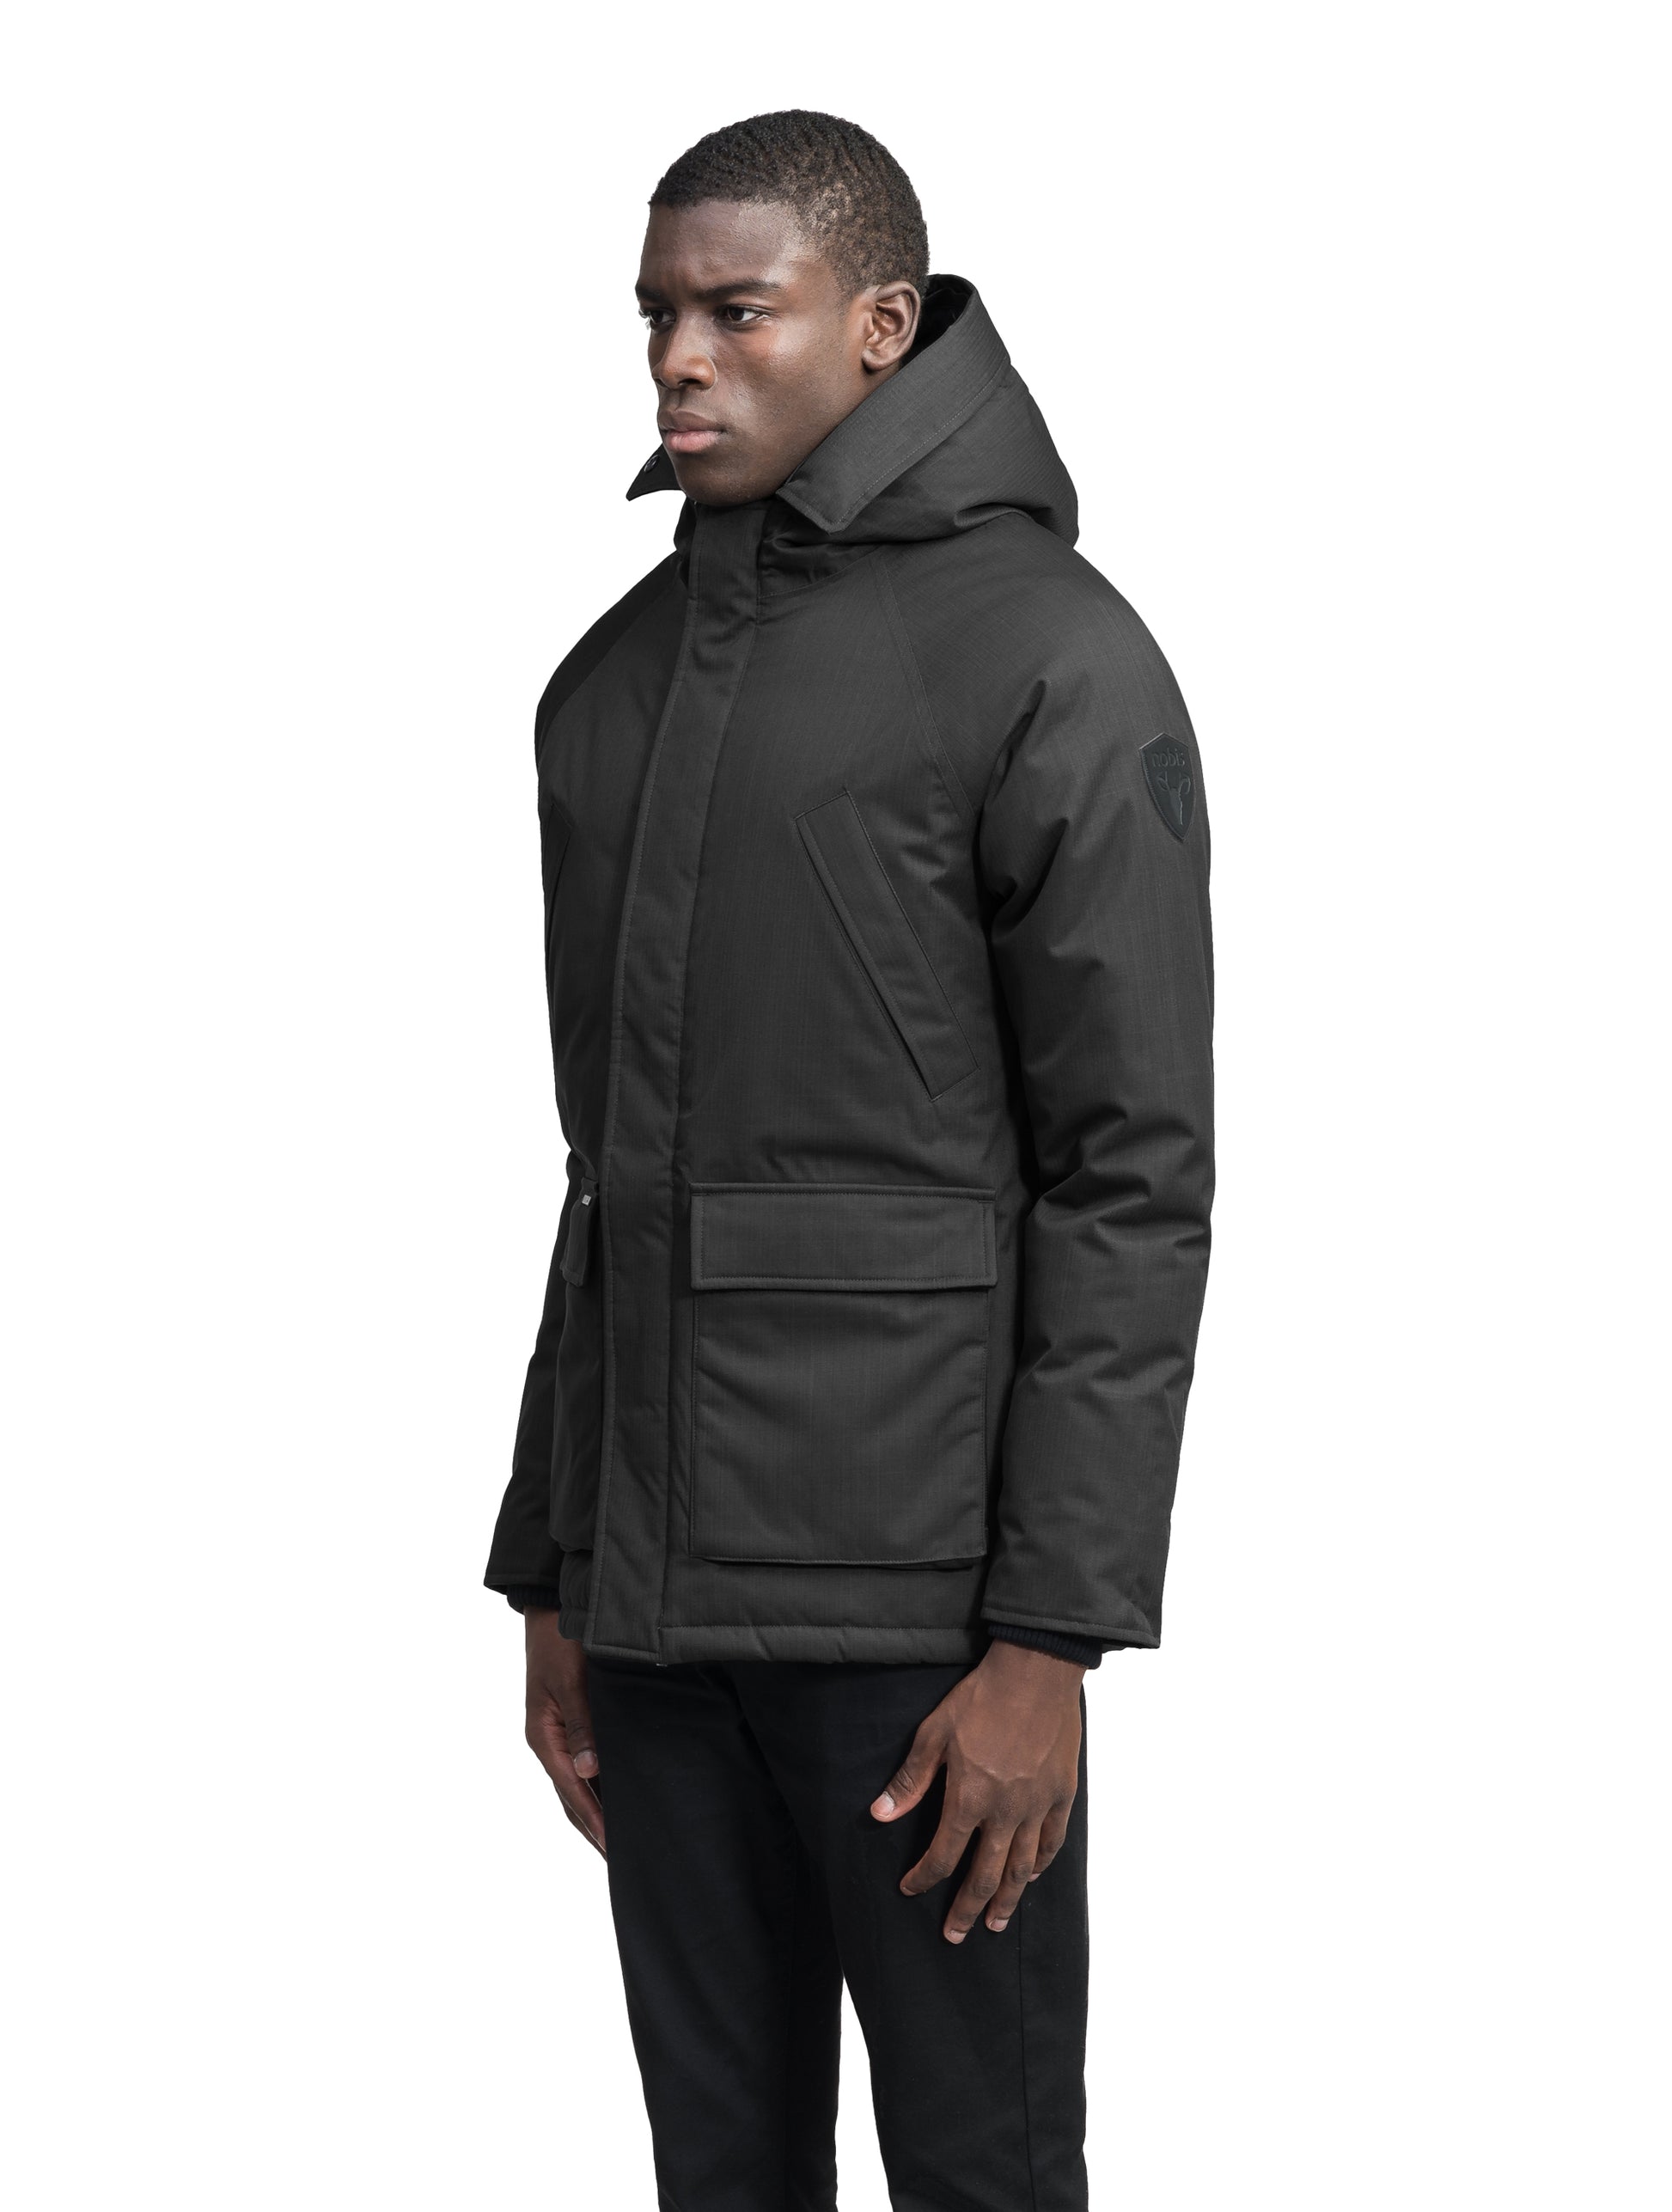 Heritage Furless Men's Parka in hip length, Canadian white duck down insulation, non-removable hood, front zipper with magnetic placket, chest hand warmer pockets, waist flap pockets, and elastic cuffs, in Black